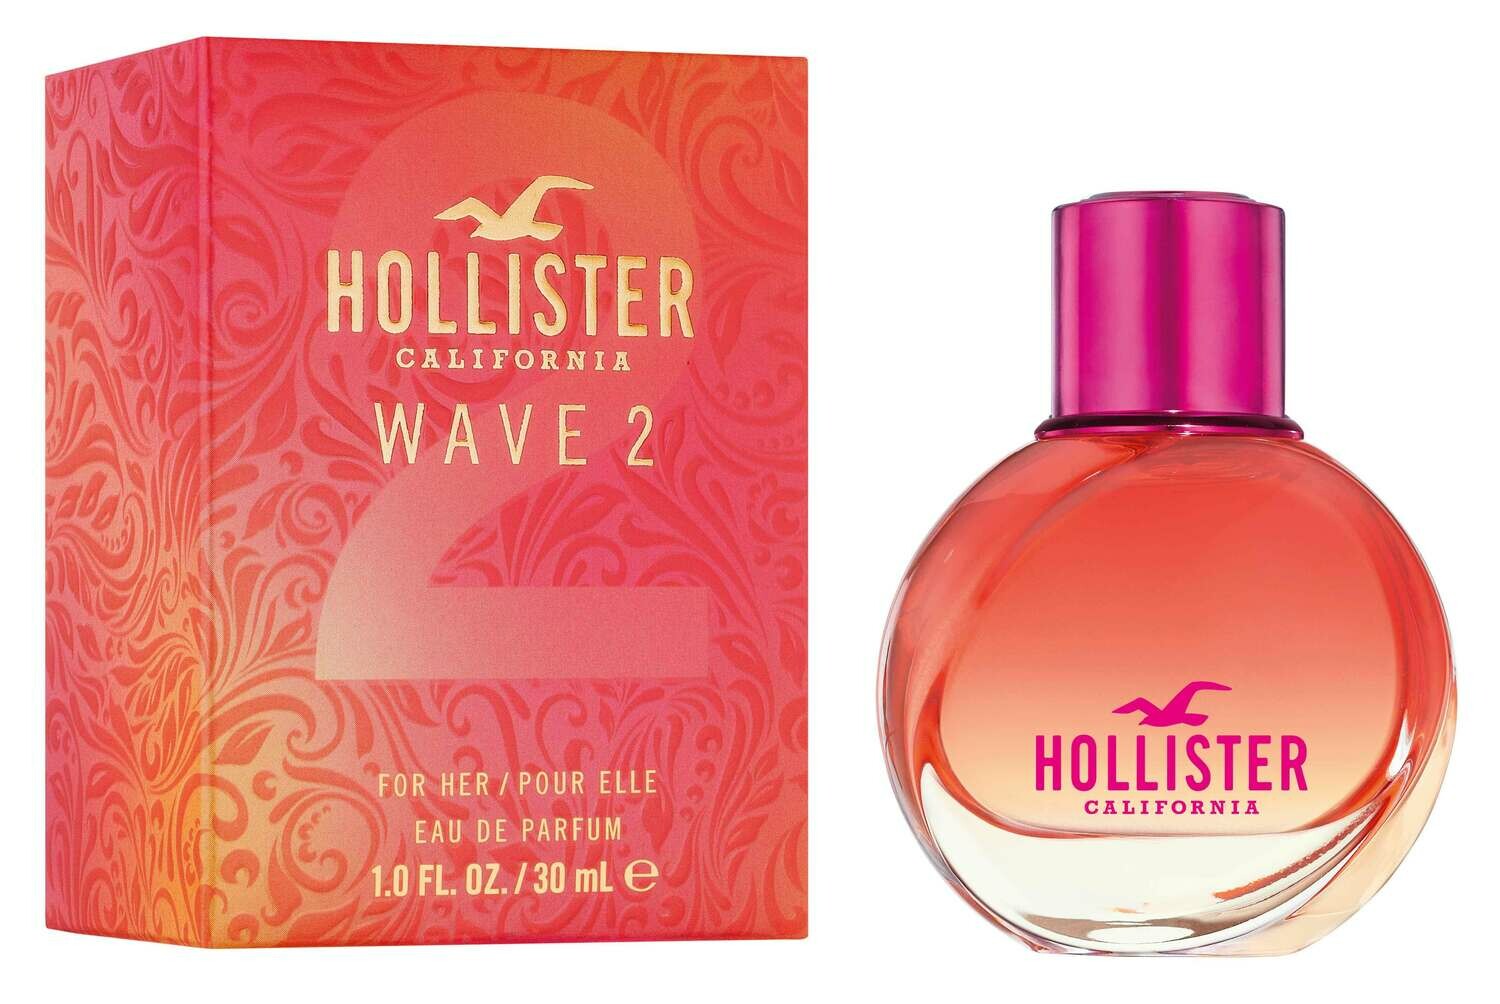 Wave 2 for Her - Hollister